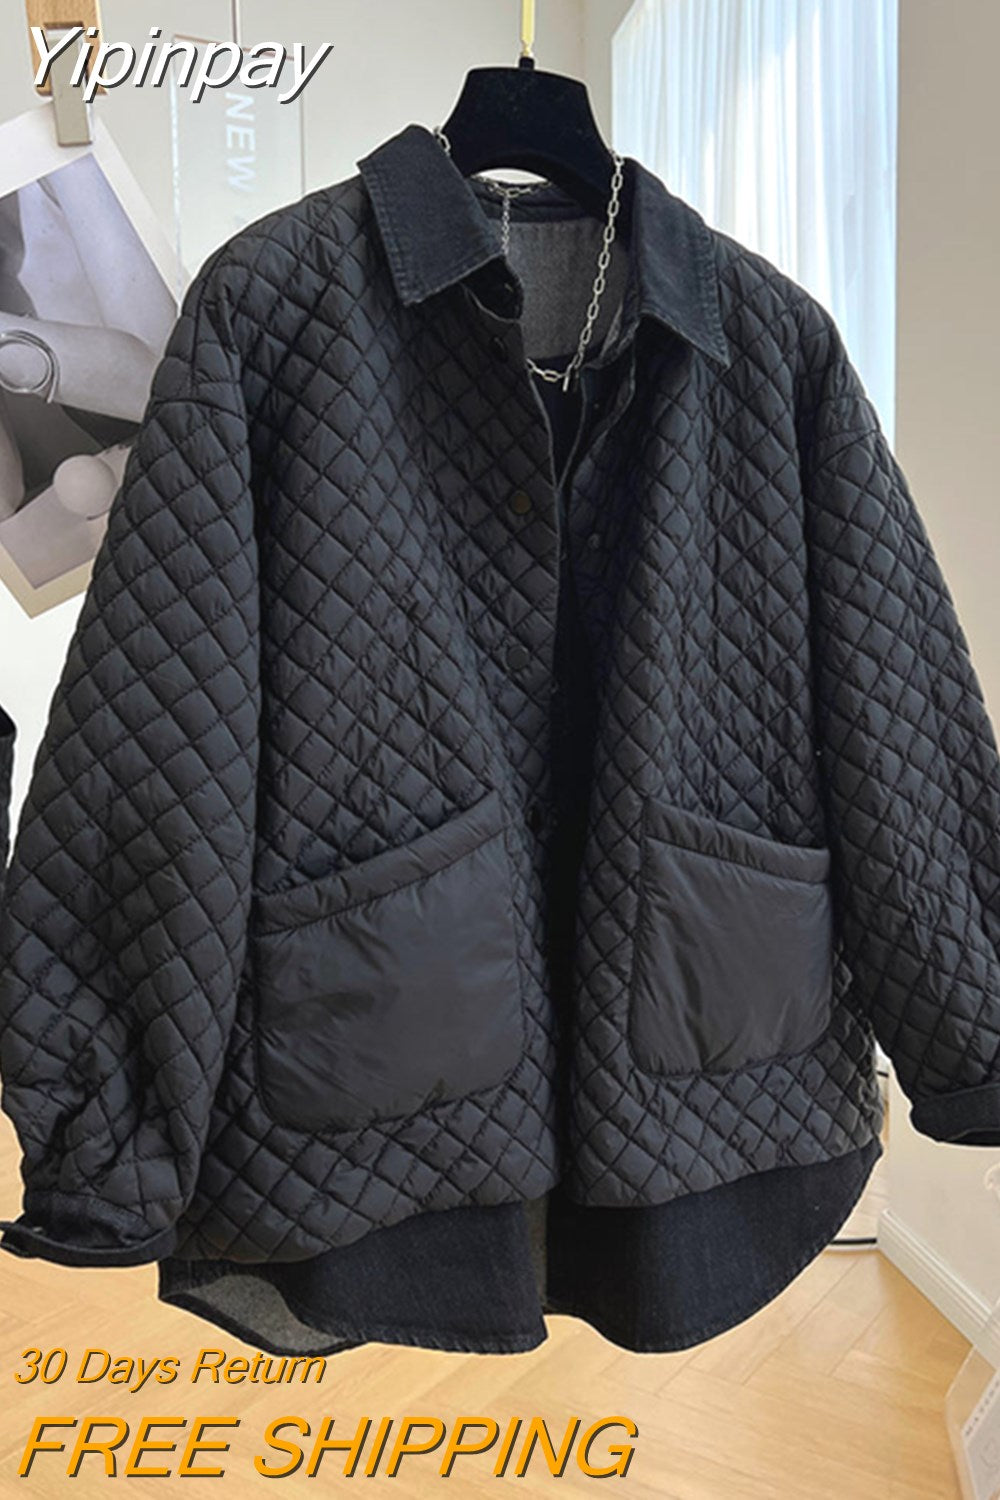 Yipinpay Winter New Diamond Plaid Cotton Coat Denim Shirt Patchwork Fake Two Piece Black Parkas Puffer Jacket Ropa Mujer Top